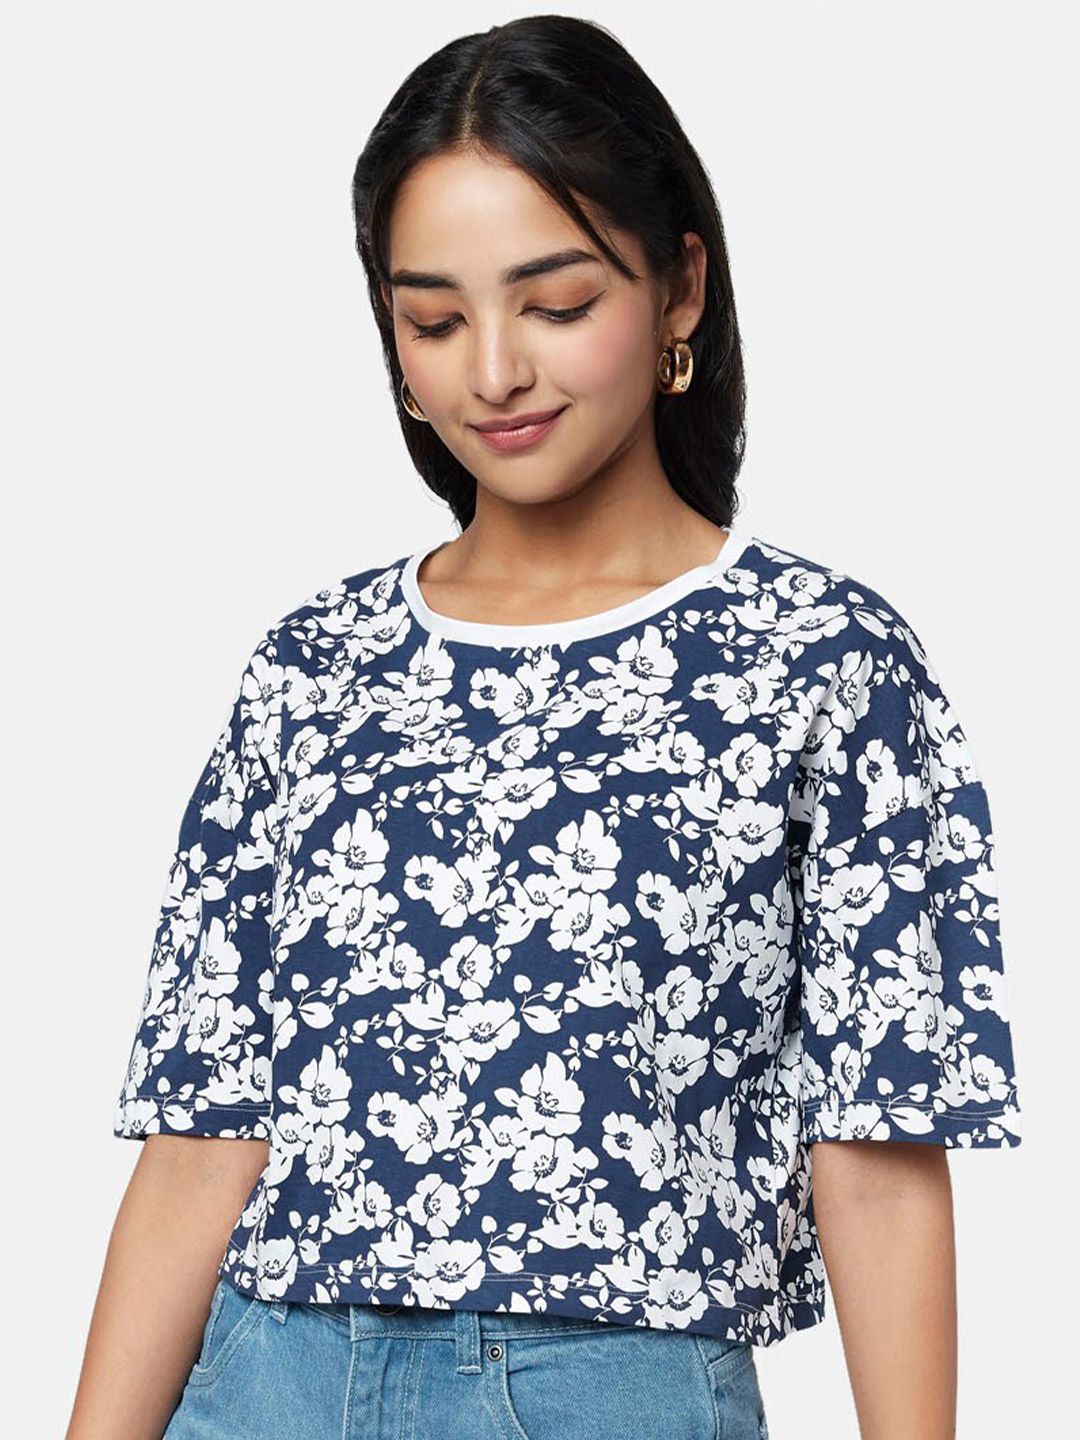 YU by Pantaloons Navy Blue Cotton Floral Print Top Price in India